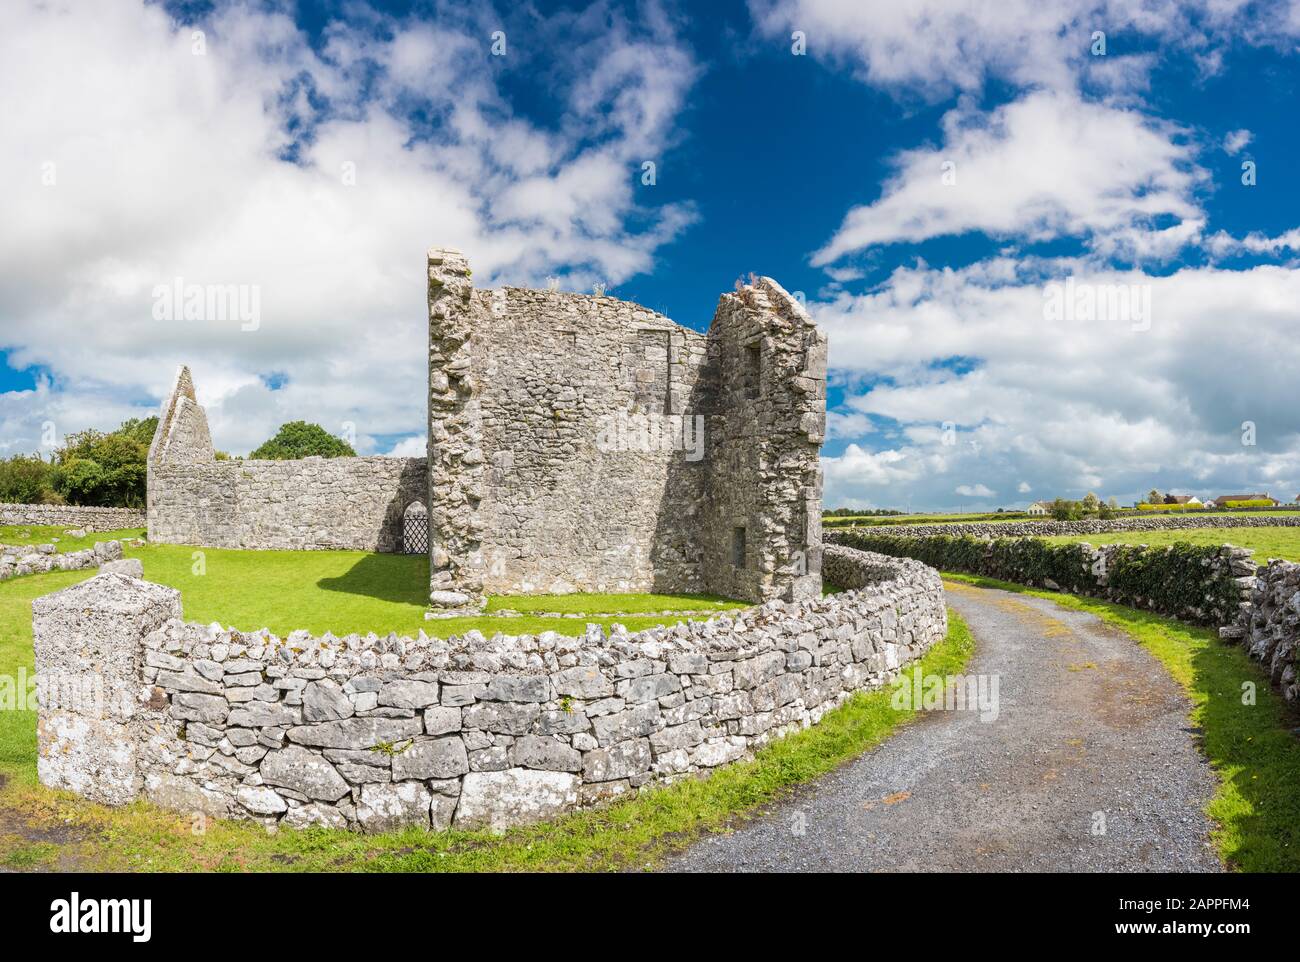 Ruined buildings and stone walls constucted from Carboniferous limestone at the 7th century Kilmacduagh monastery near Gort, County Galway, Ireland Stock Photo